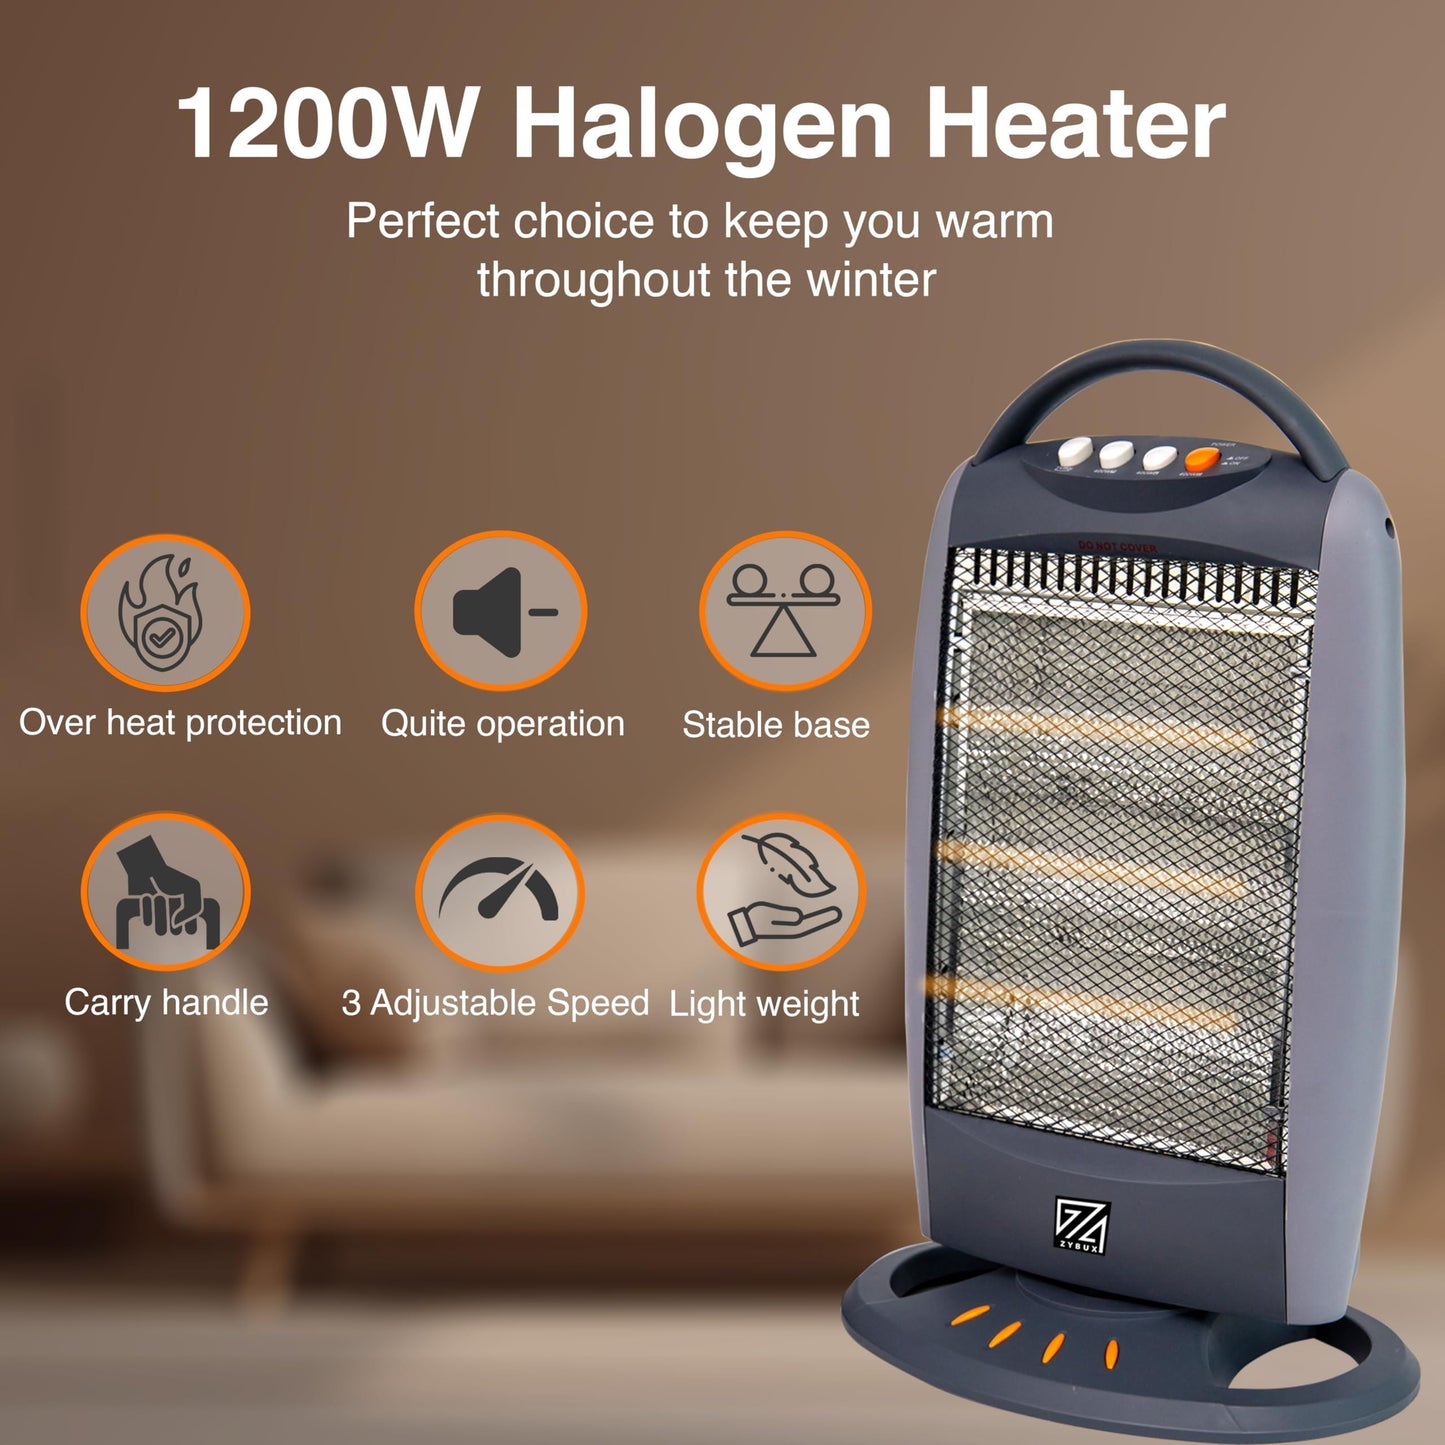 ZYBUX - 1200w Halogen Compact Quarts Heater – 3 Heat Setting Energy Efficient Room Heaters for Indoor Use | Portable Electric Heater with Safety Tip Over Switch | Heaters for home